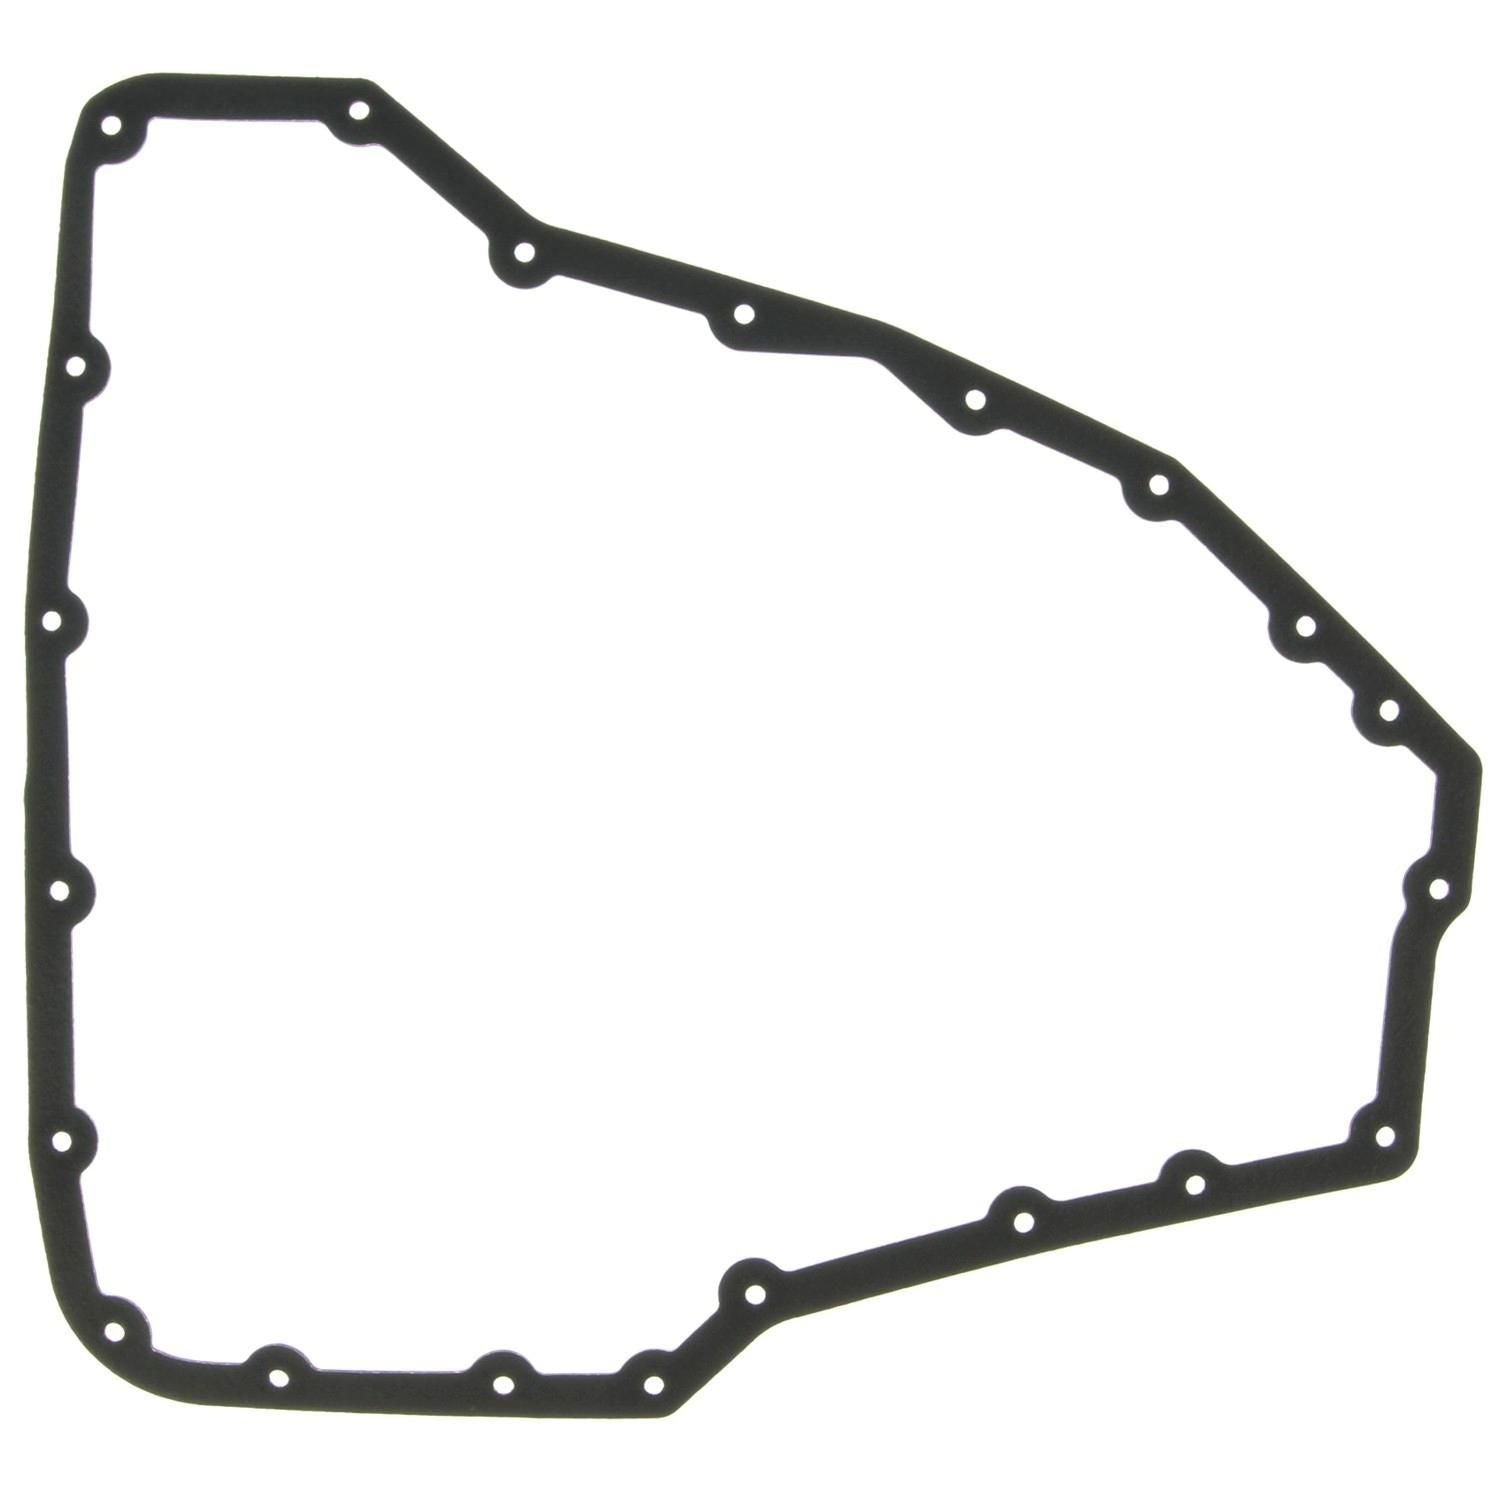 MAHLE Automatic Transmission Oil Pan Gasket W39380